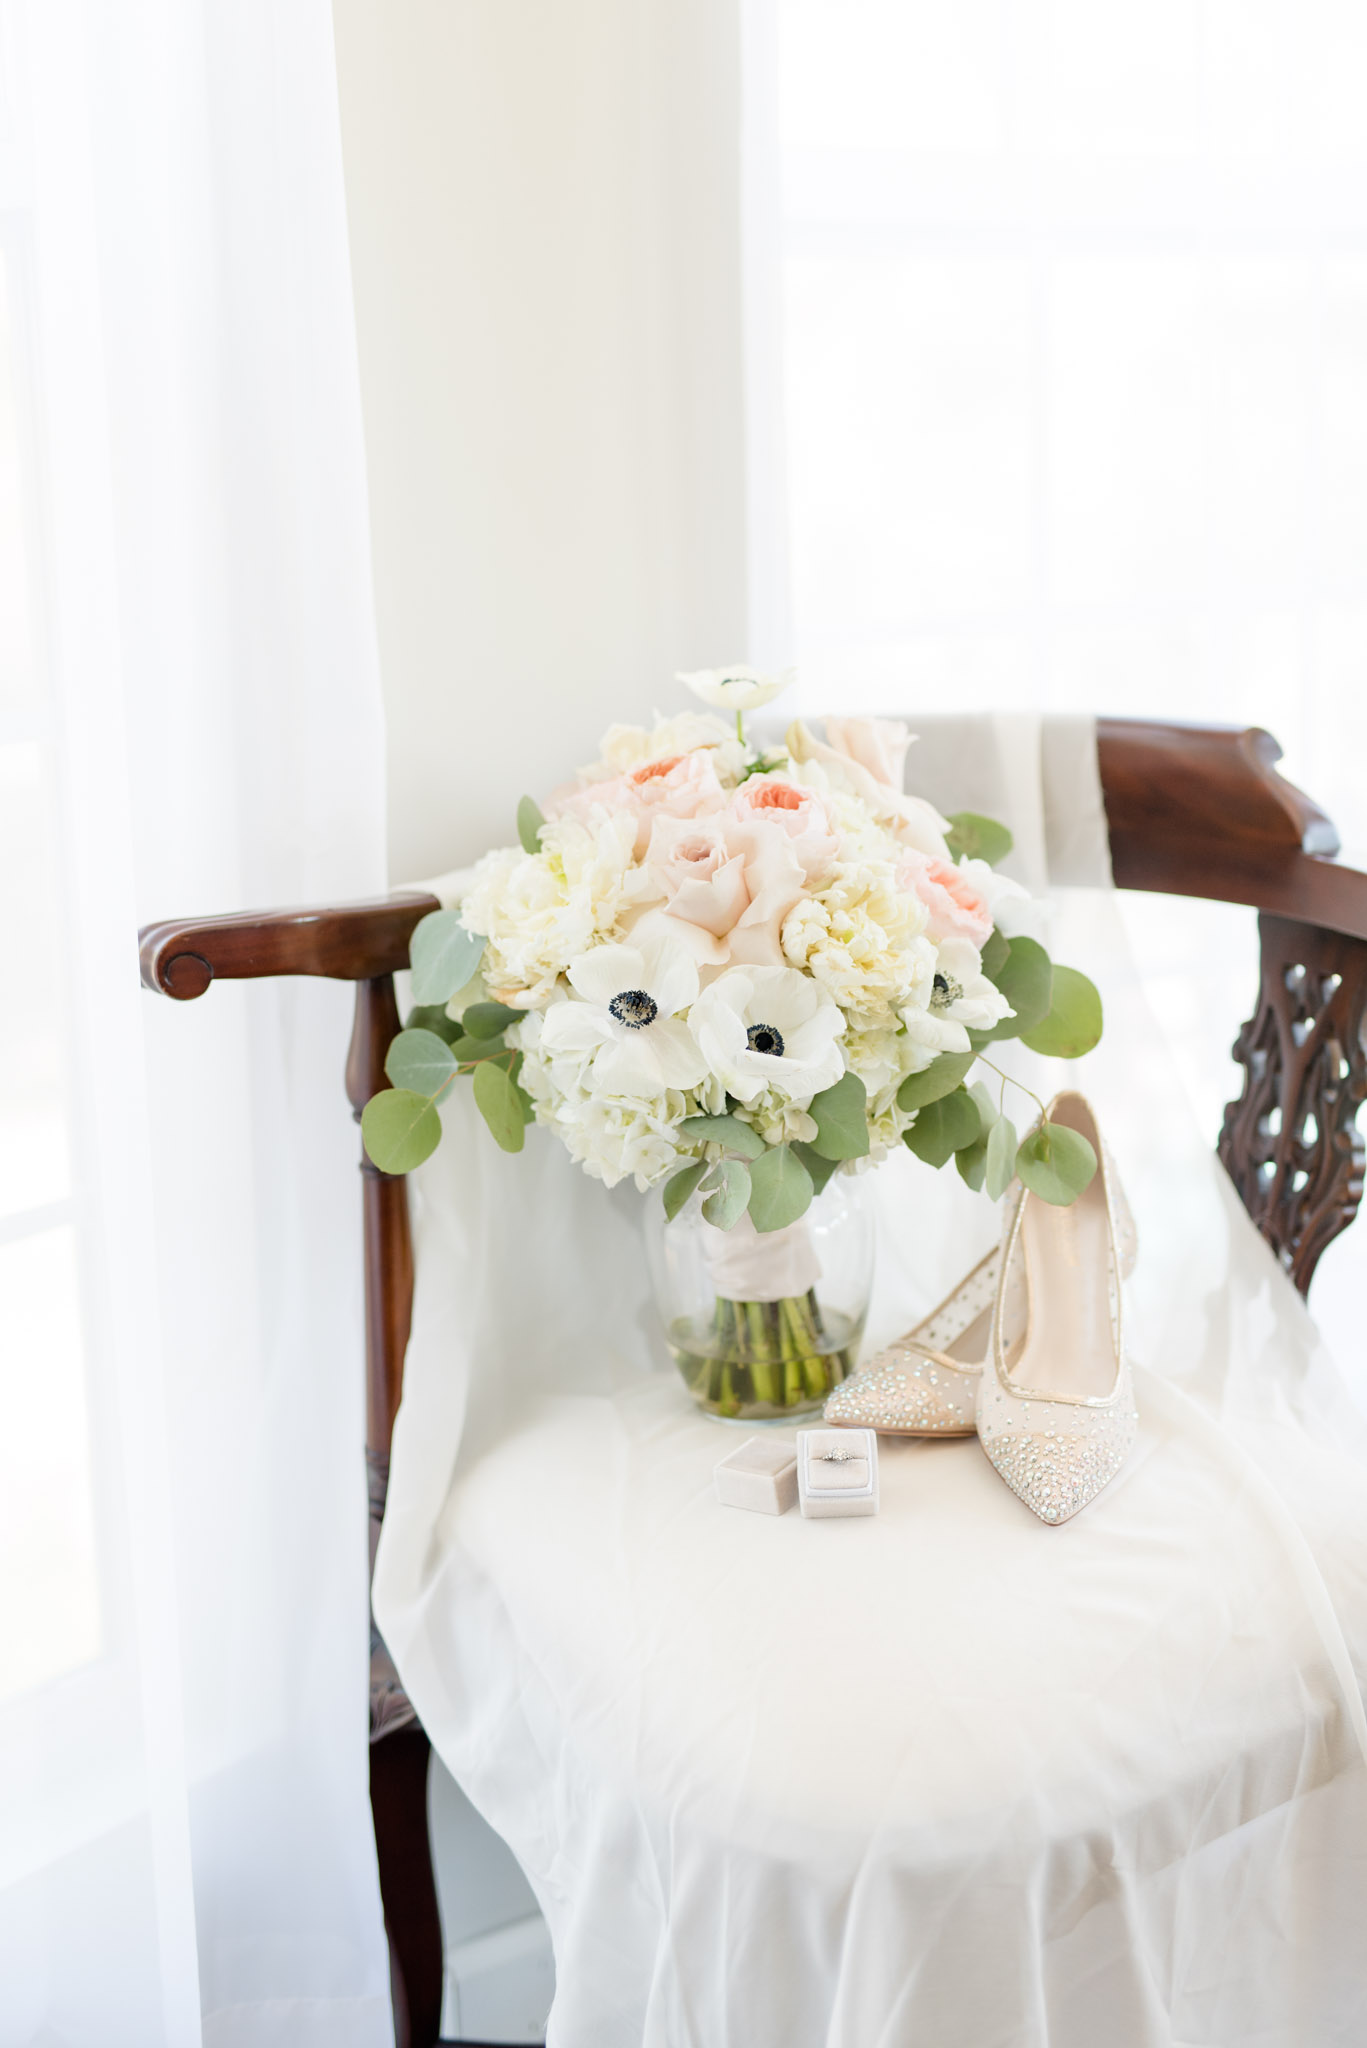 Bridal boquet, shoes, and ring sit on chair.